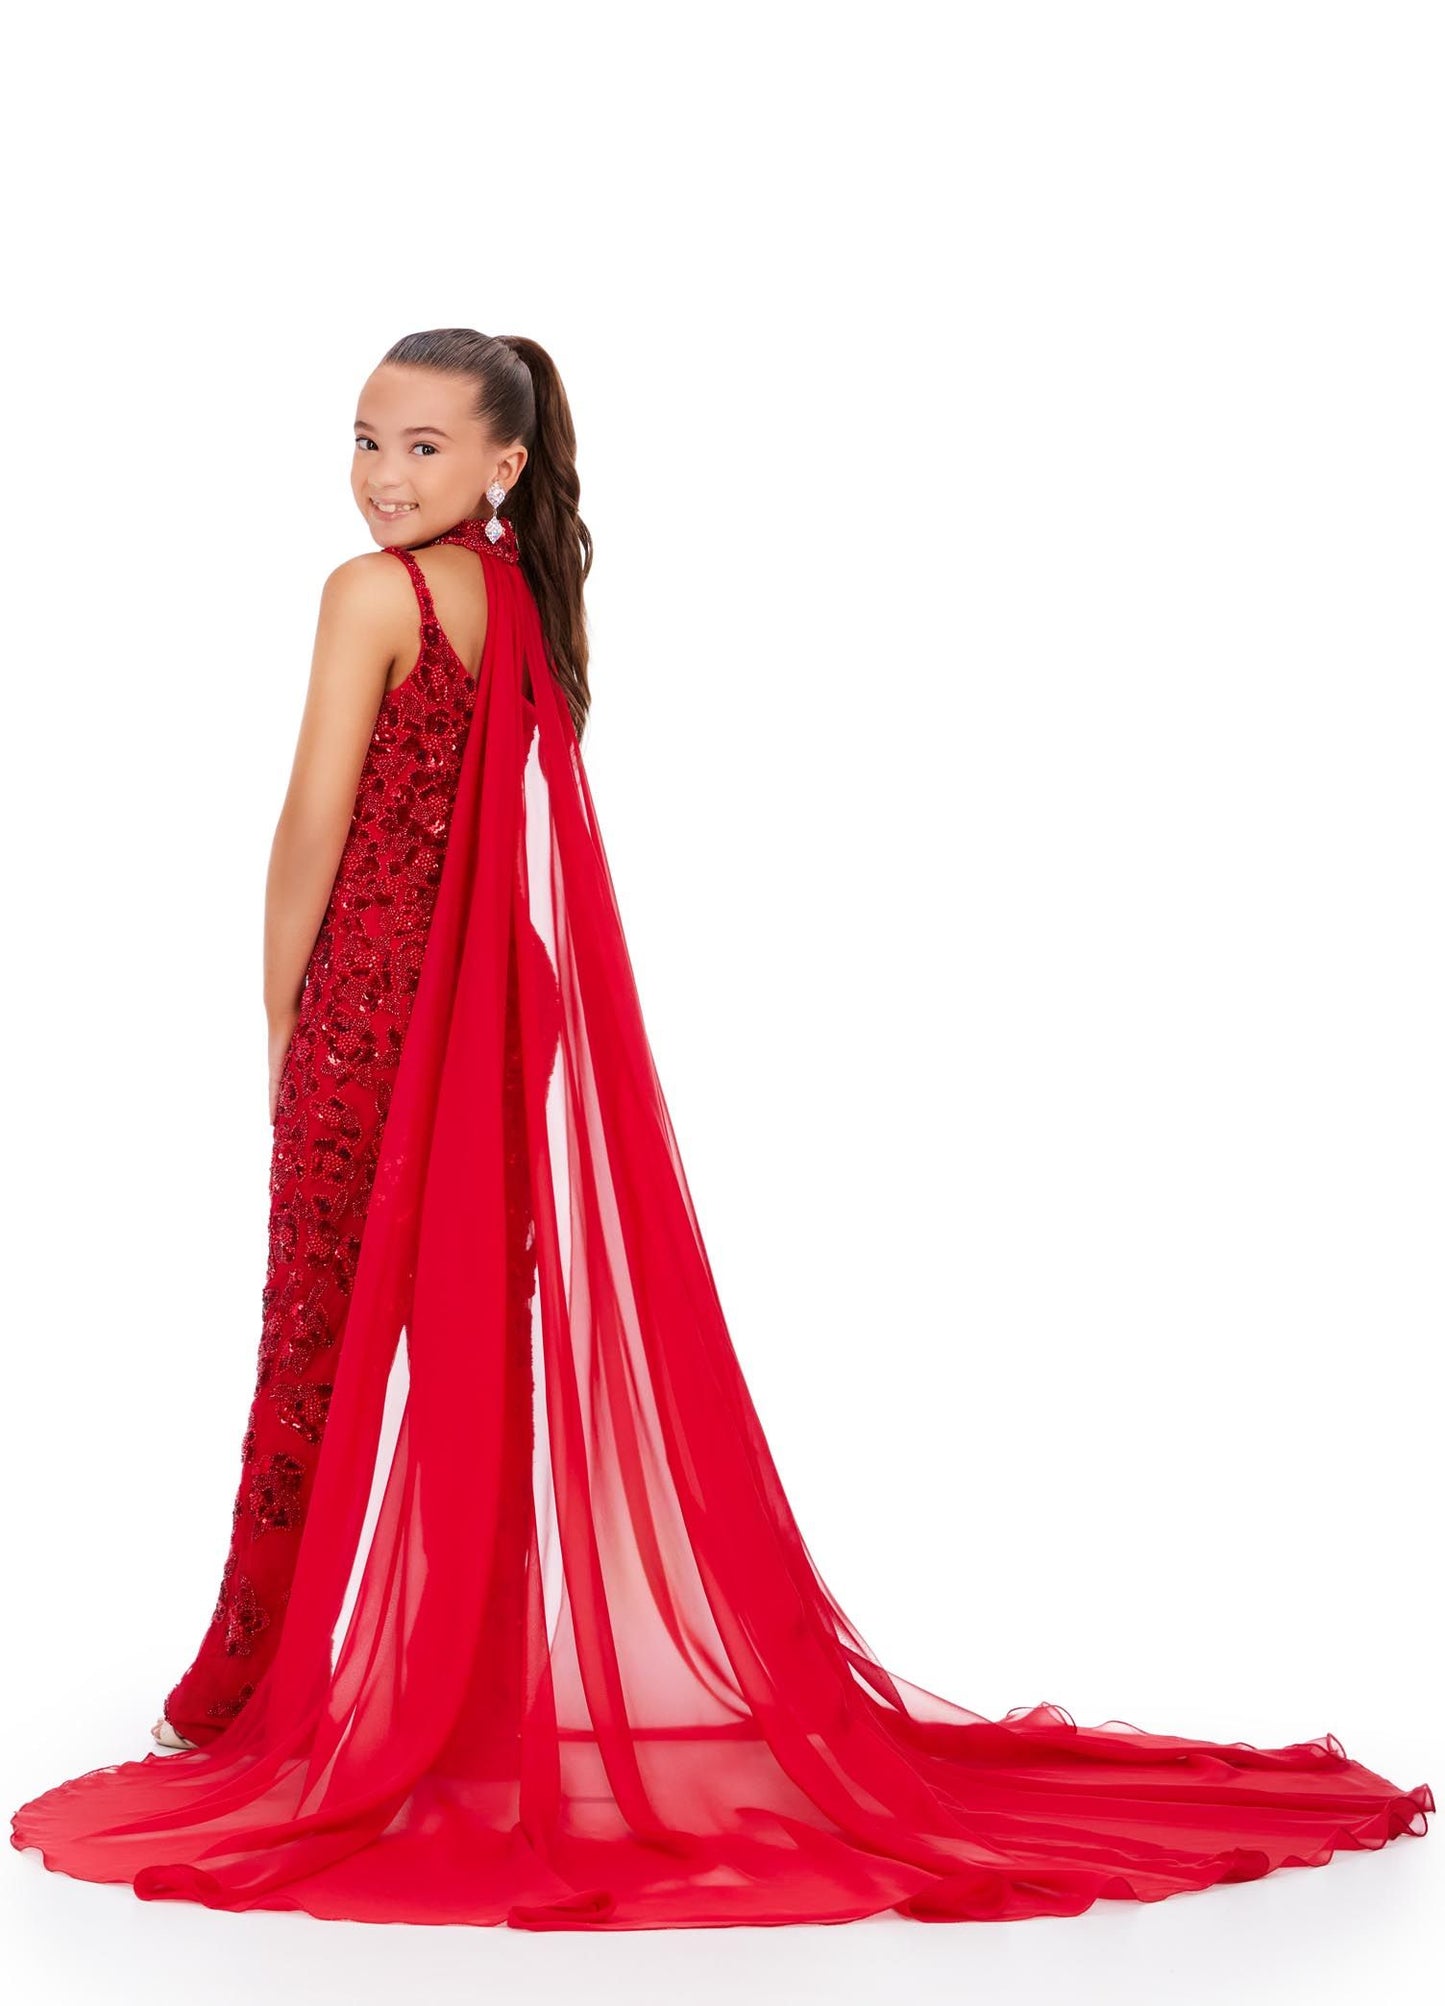 Ashley Lauren Kids 8190 Red Fully Beaded With Beaded Choker And Chiffon Cape Jumpsuit 